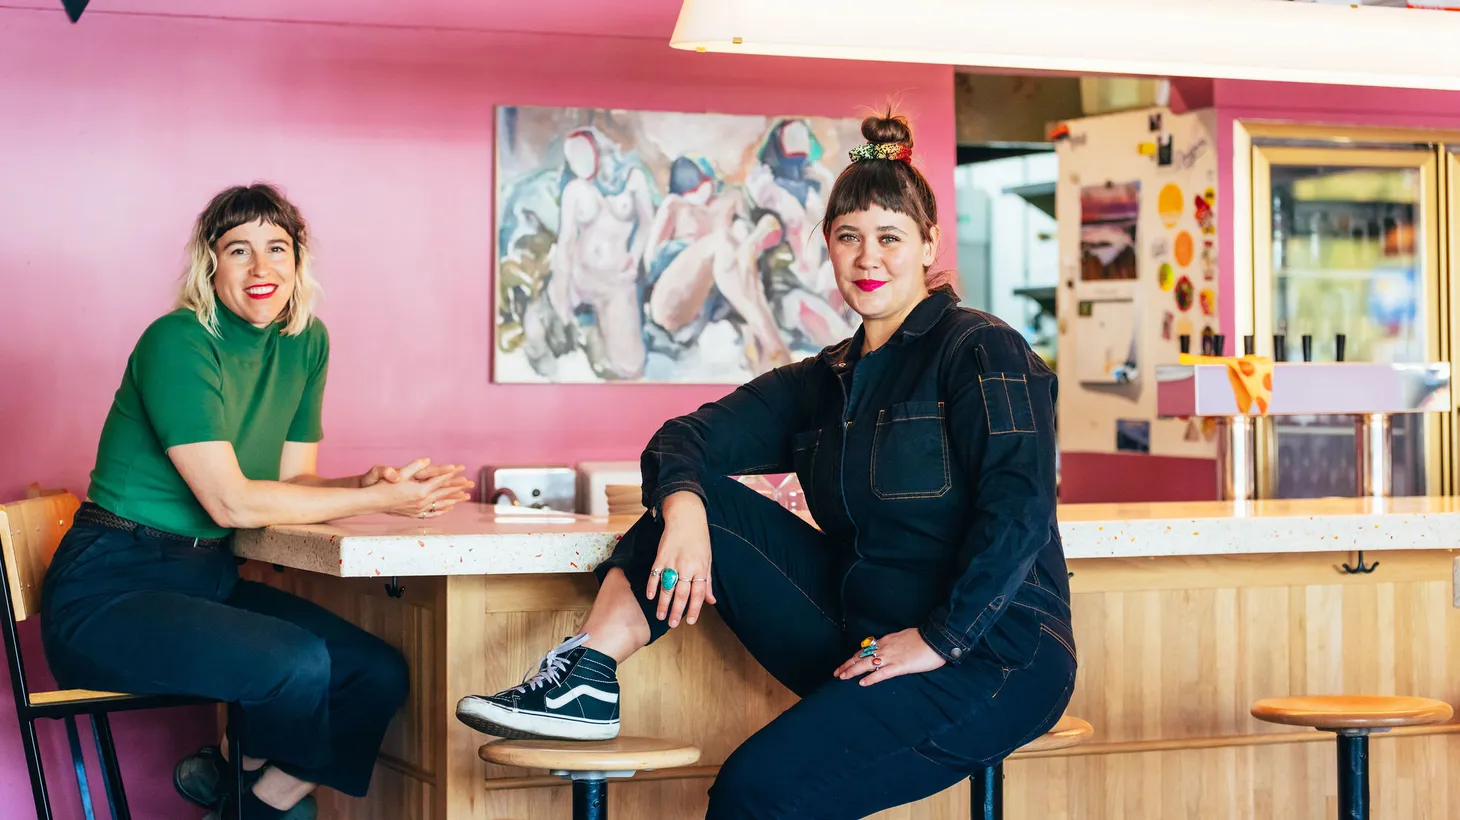 “We are a strip mall wine bar for the sapphically-inclined. And we use that term very intentionally. Because sometimes – not always, but sometimes – the word ‘lesbian’ can be somewhat alienating to members of the gender-expansive community,” says The Ruby Fruit co-founder Emily Bielagus (left).